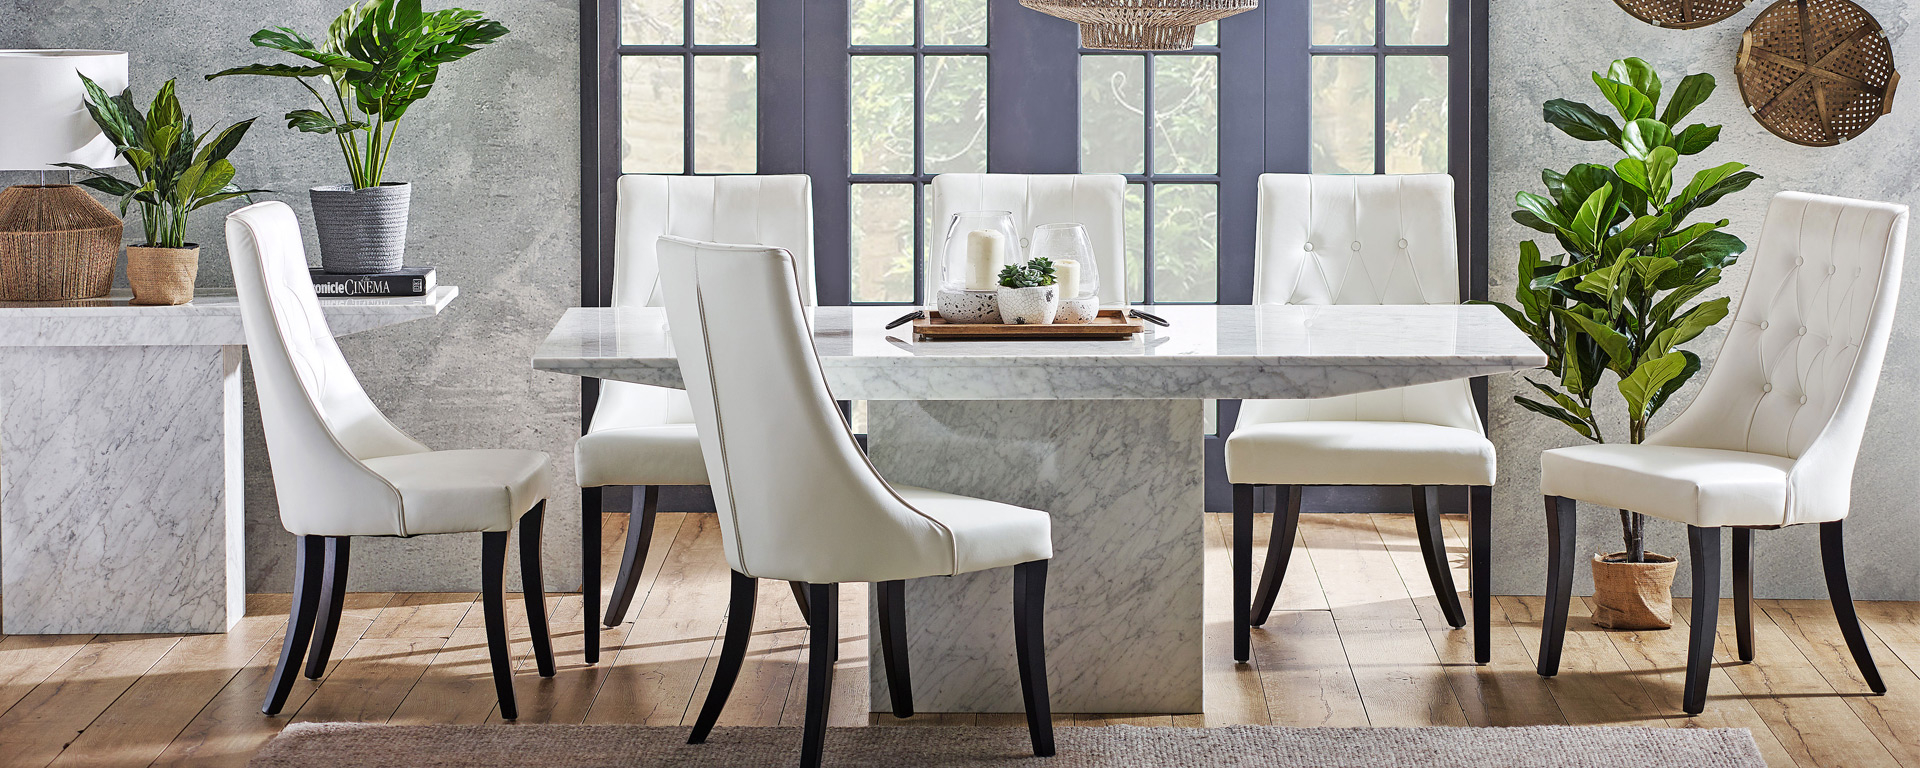 Dining Room Goals 5 Trending Concrete And Stone Dining within sizing 1920 X 768